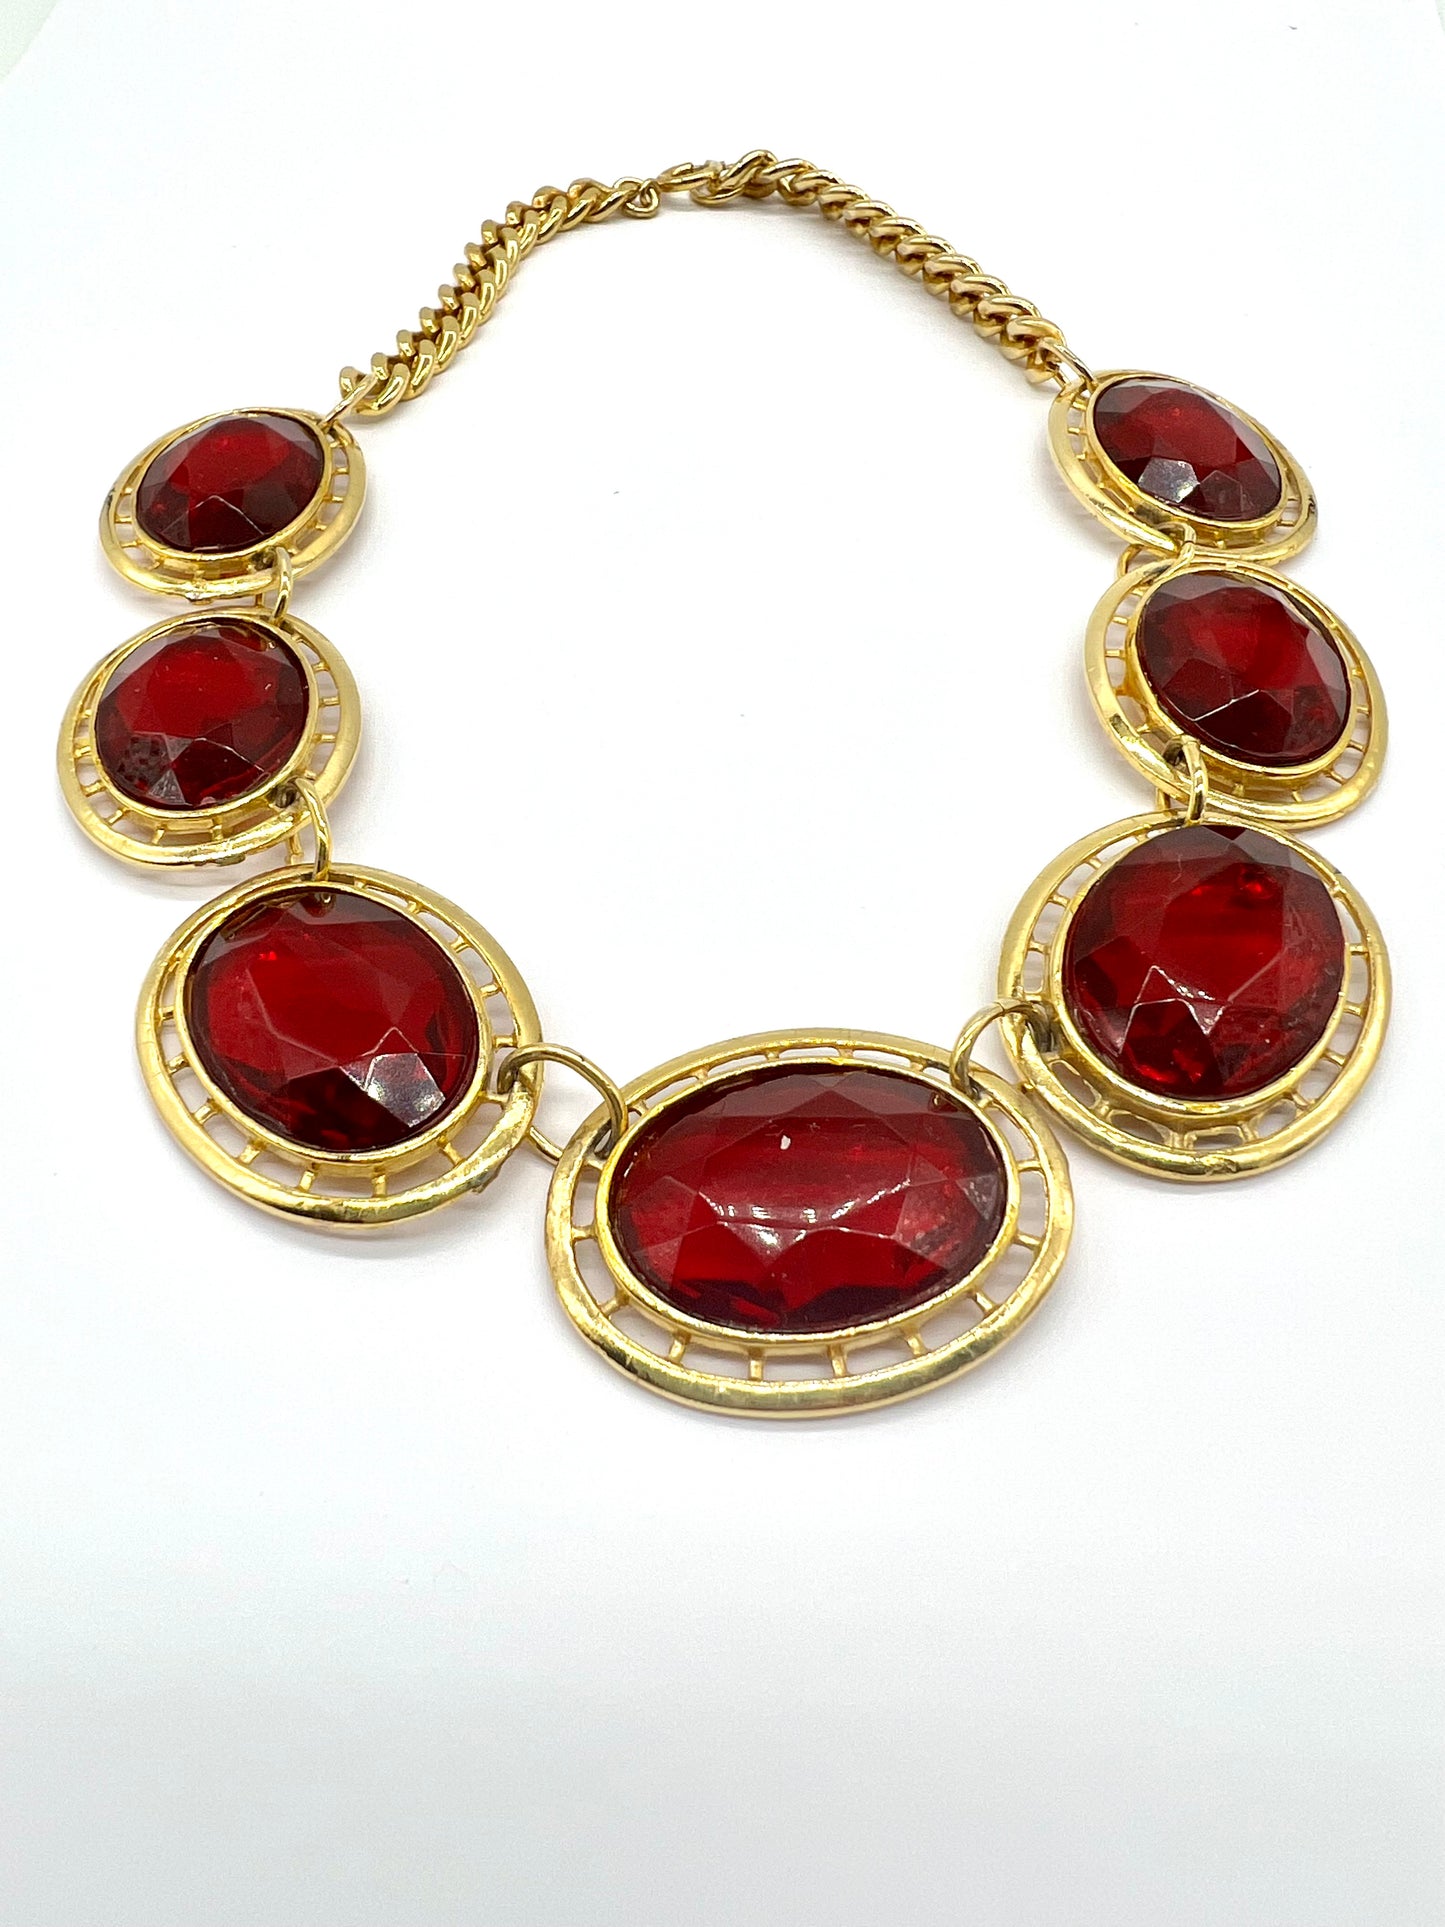 70's Gold Plated Necklace with glass stone